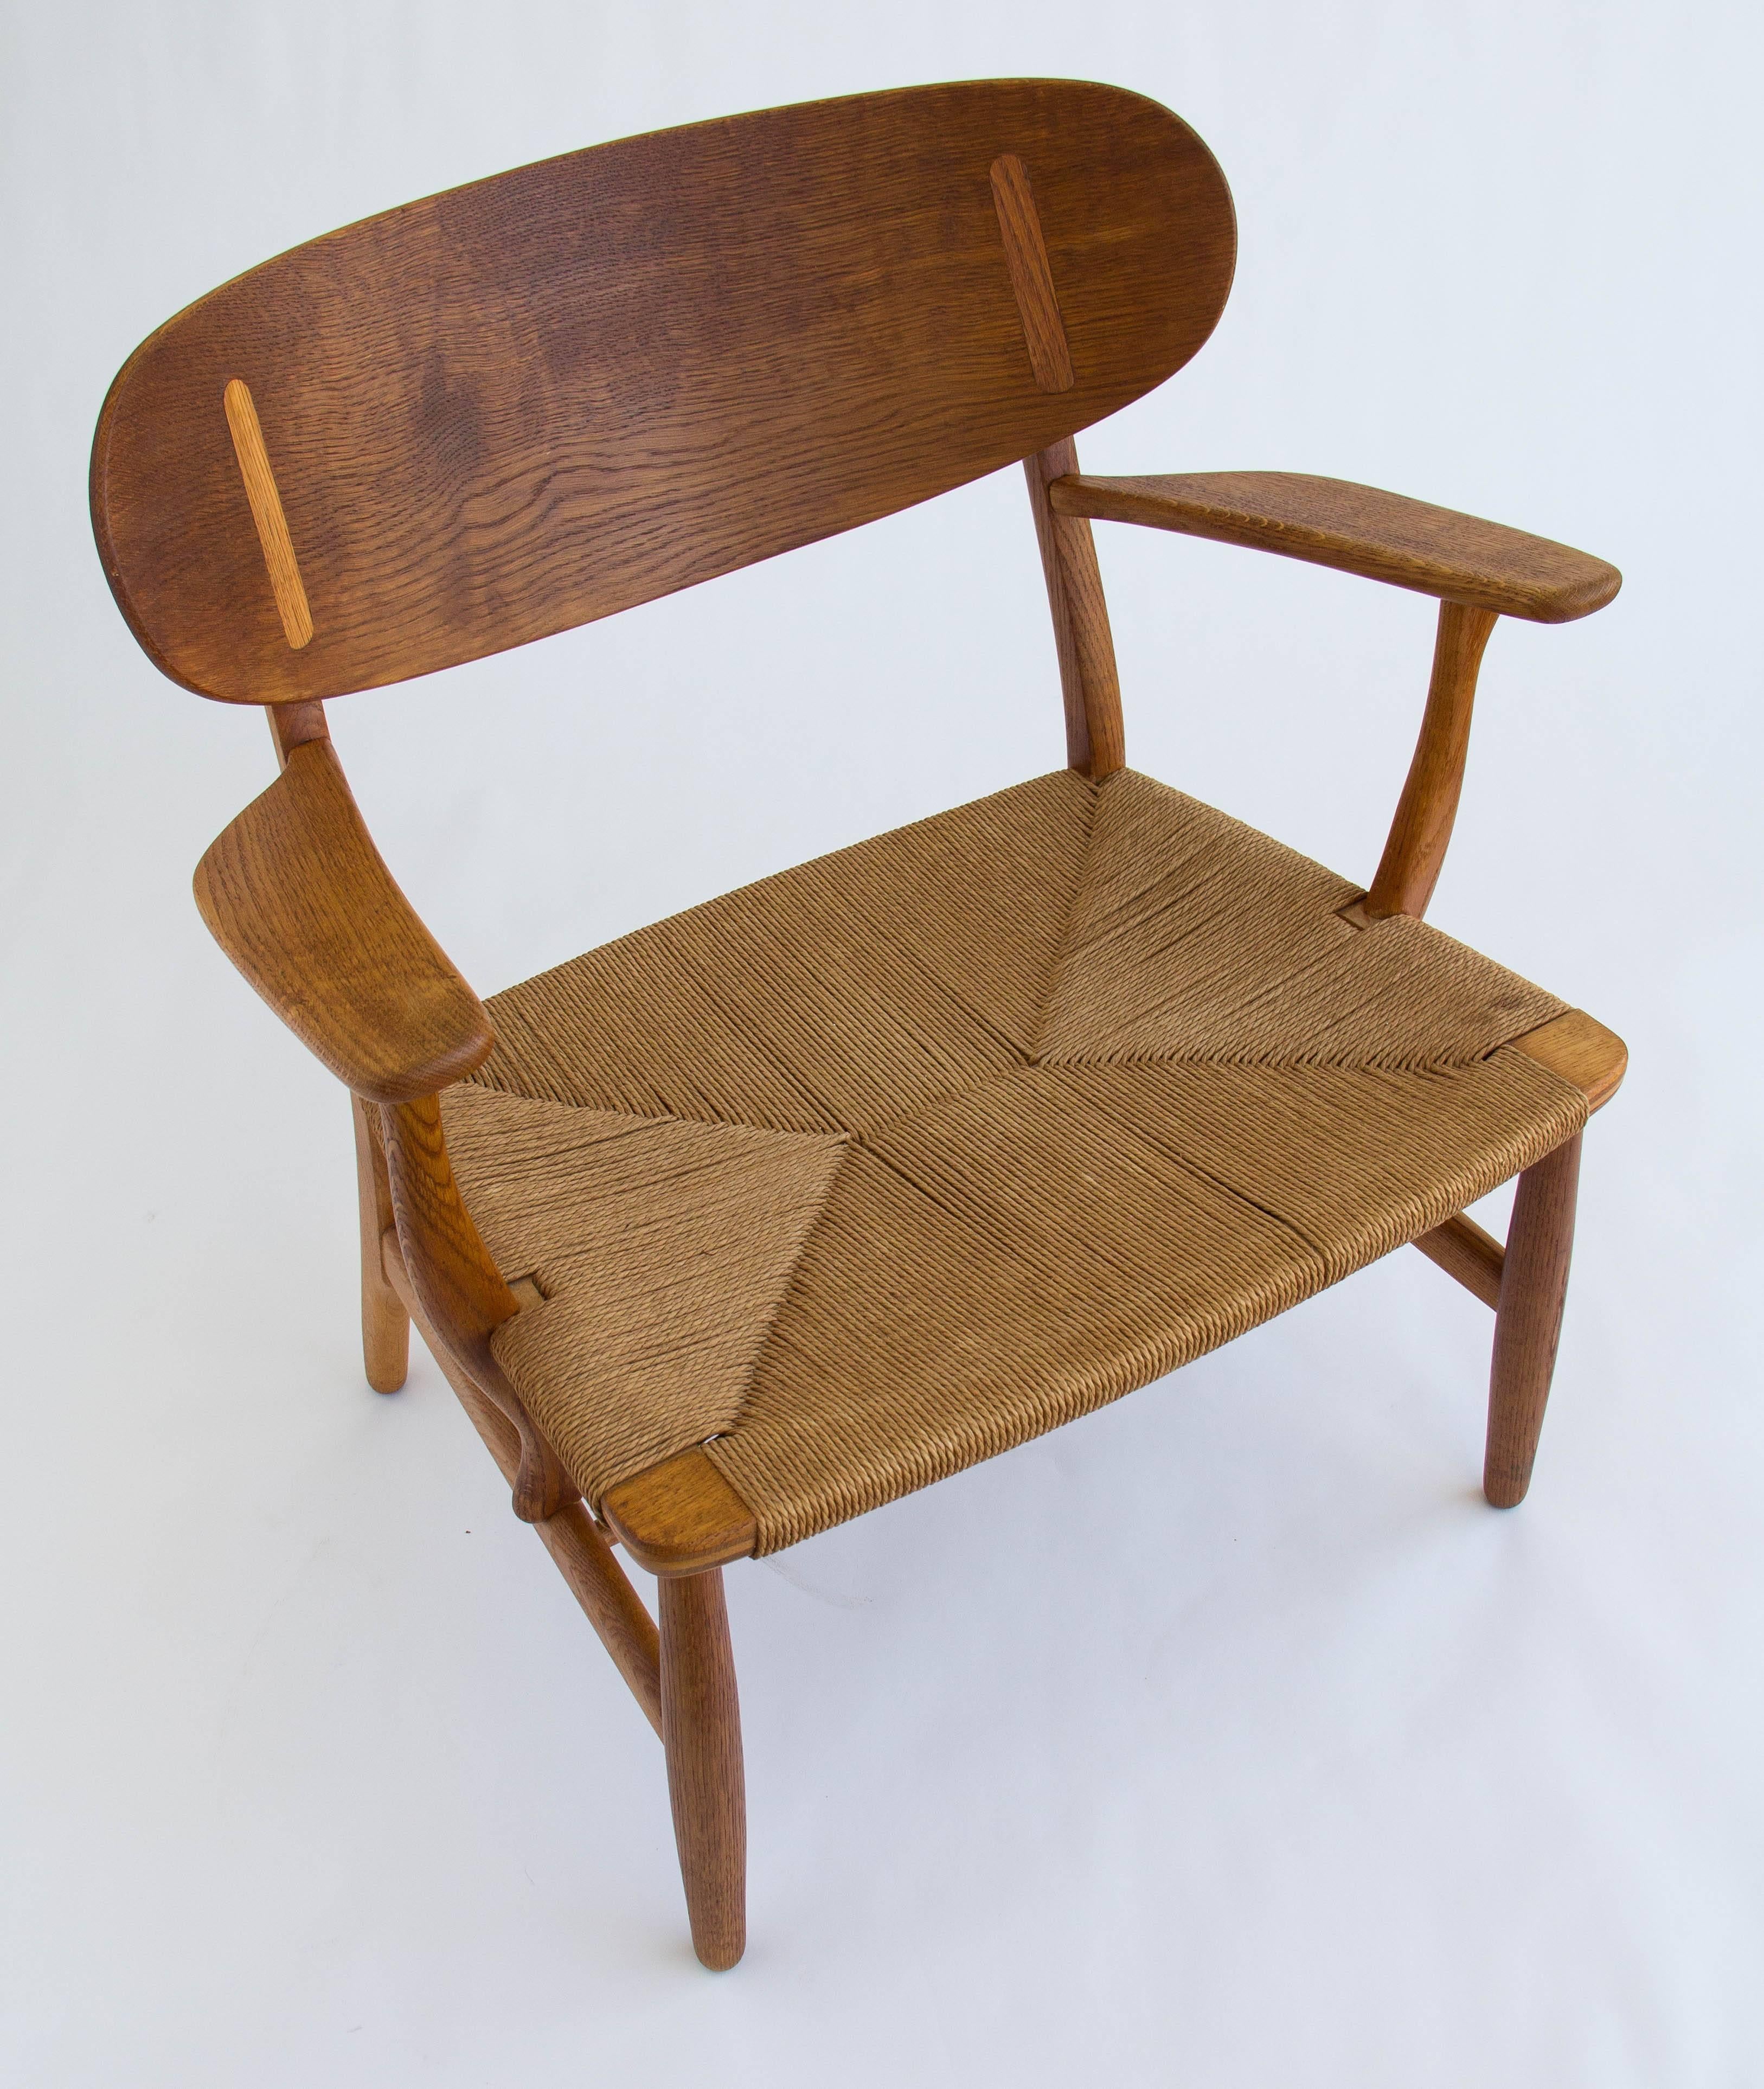 Wide armchair with oak frame and Danish paper cord seat. The design by Hans J. Wegner for manufacturer Carl Hansen & Søn features cantilevered armrests, inlay details on the curved backrest, and beautiful wood grain.

Condition: Excellent vintage